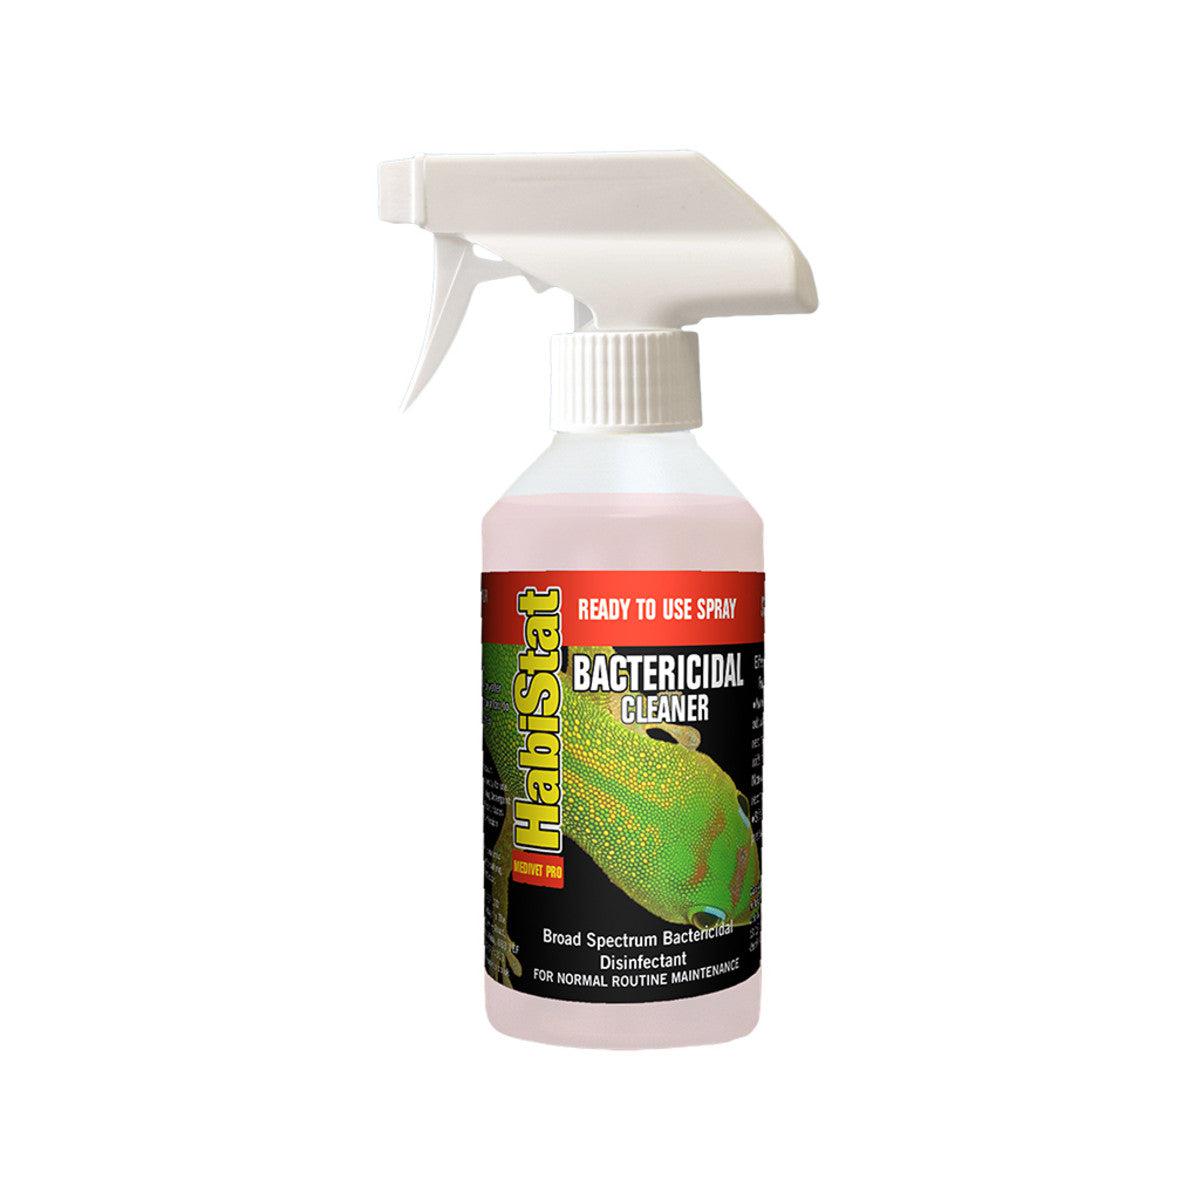 HabiStat Bactericidal Cleaner, Standard, Ready to Use Spray